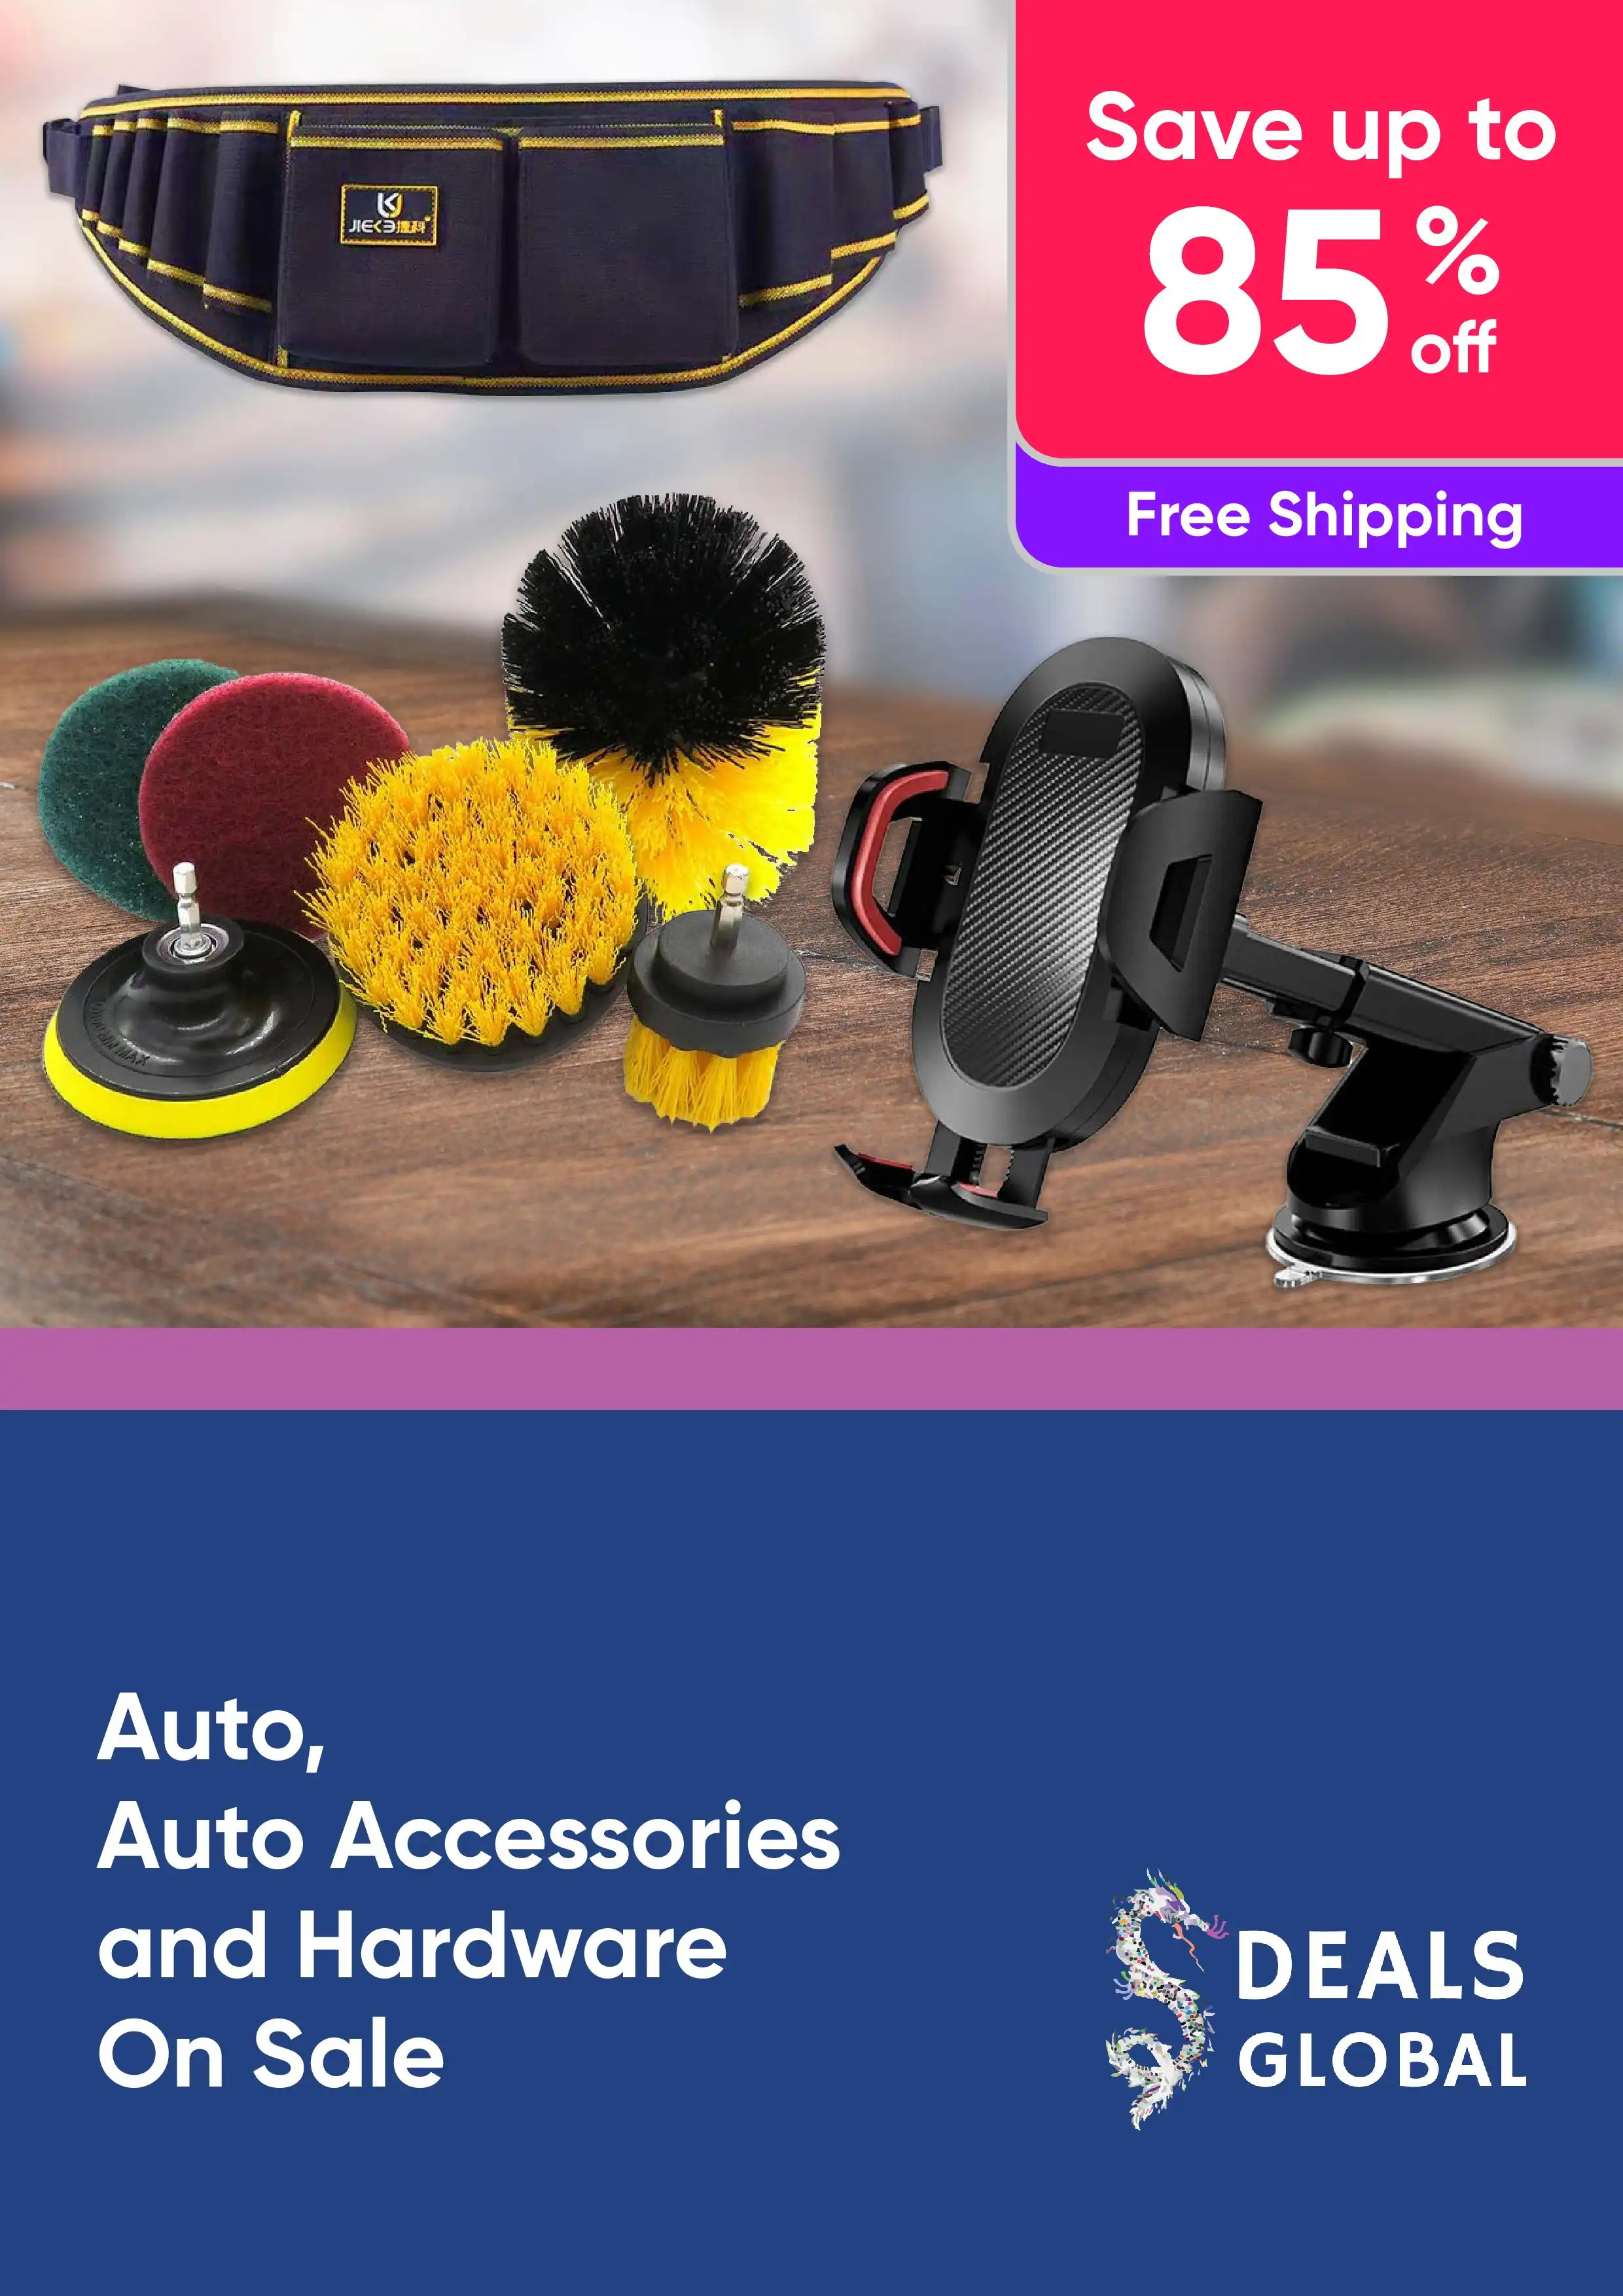 Auto, Auto Accessories and Hardware On Sale - Save up to 85% Off